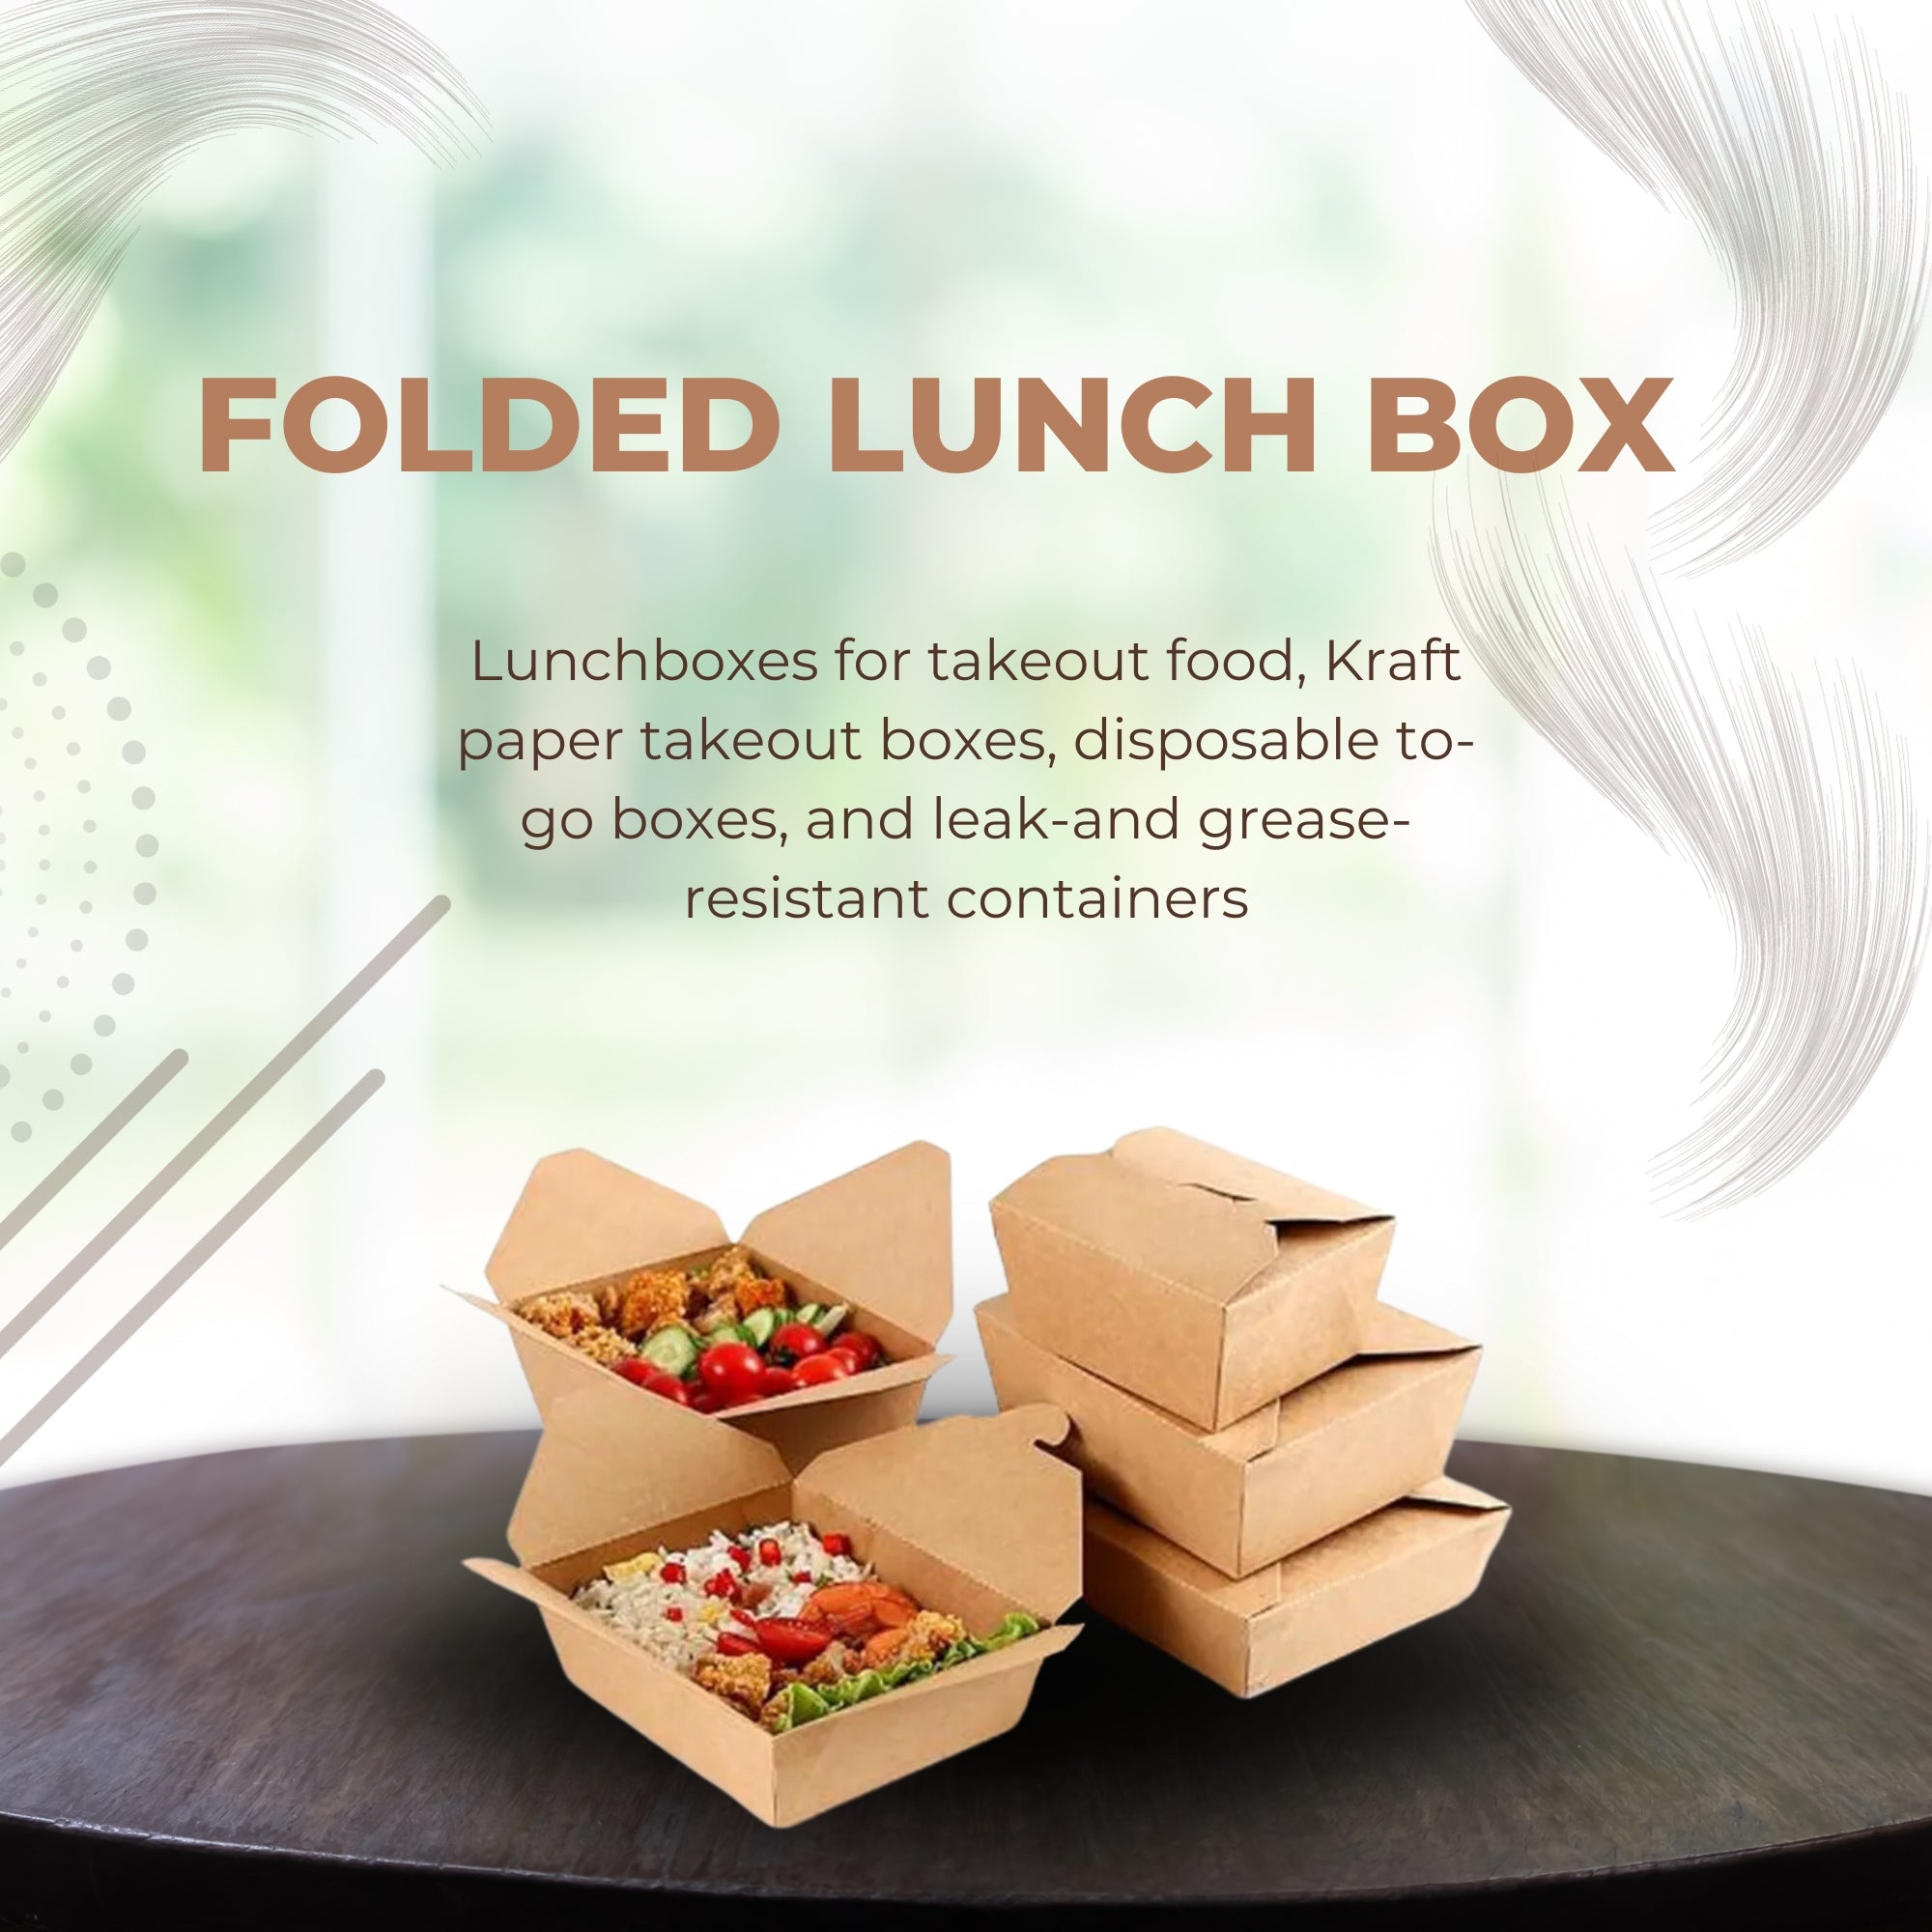 Takeout Folded Lunch Box, Ecosmart, sustainable, brown paper, disposable, affordable, Leak resistant, kraft paper, macaroni, salad, bulk pack, frozen treats, shops, diners, restaurants, food trucks, bakeries, Multi-Purpose, high-quality, avoid leaks, spills, pulp, durable, occasion, dinnerware, microwavable, food safe, meal prep, catering supplies, Packaging, takeout, deliveries, customized, sophistication, personalize, freshness, Compostable Fiber, renewable, biodegradable